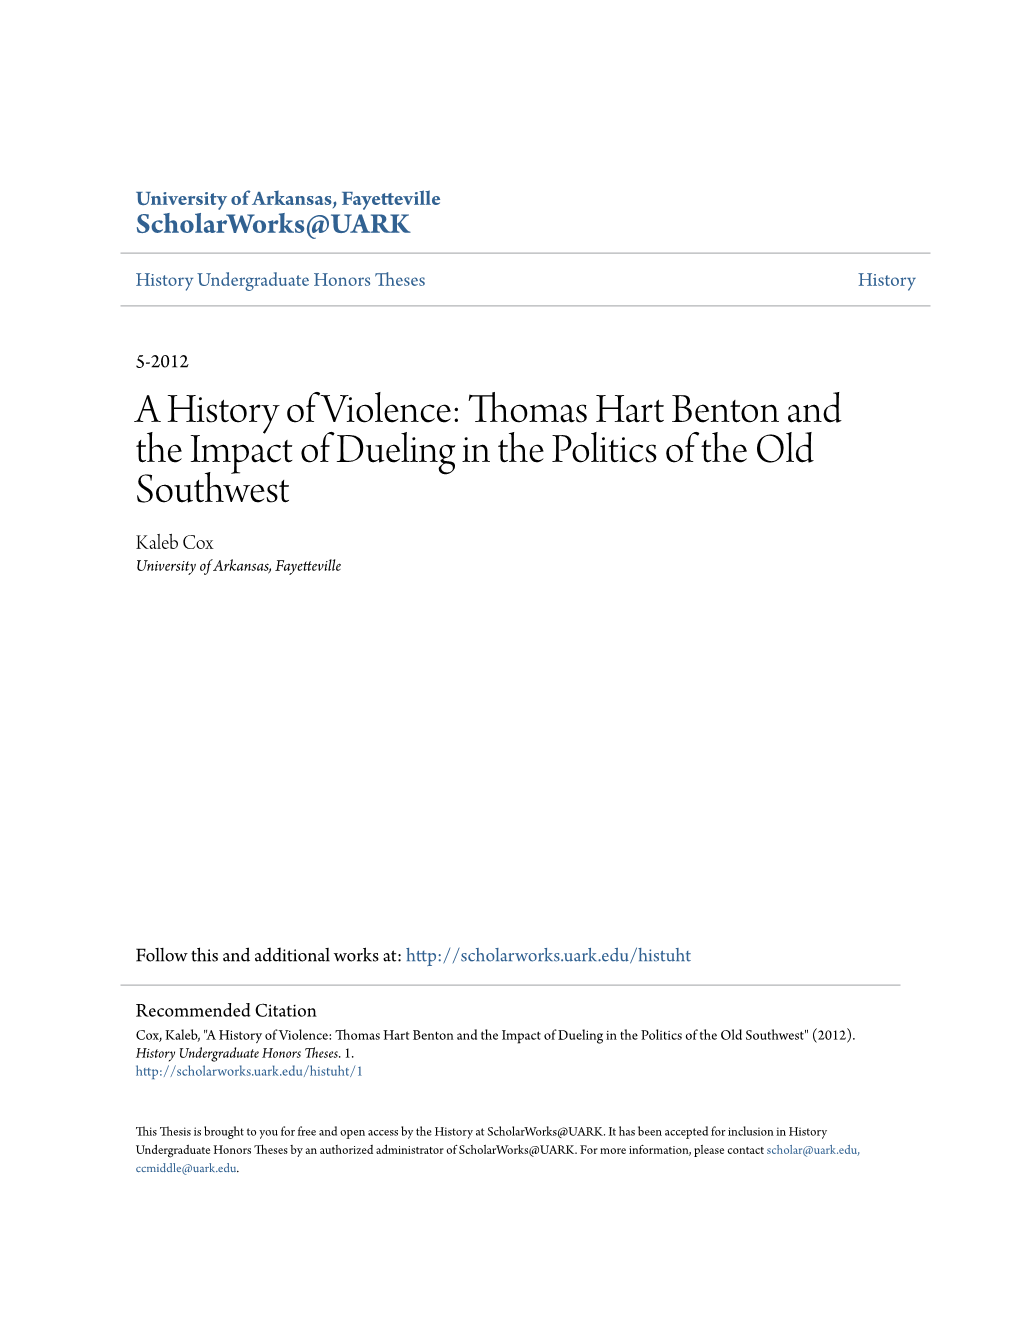 Thomas Hart Benton and the Impact of Dueling in the Politics of the Old Southwest Kaleb Cox University of Arkansas, Fayetteville